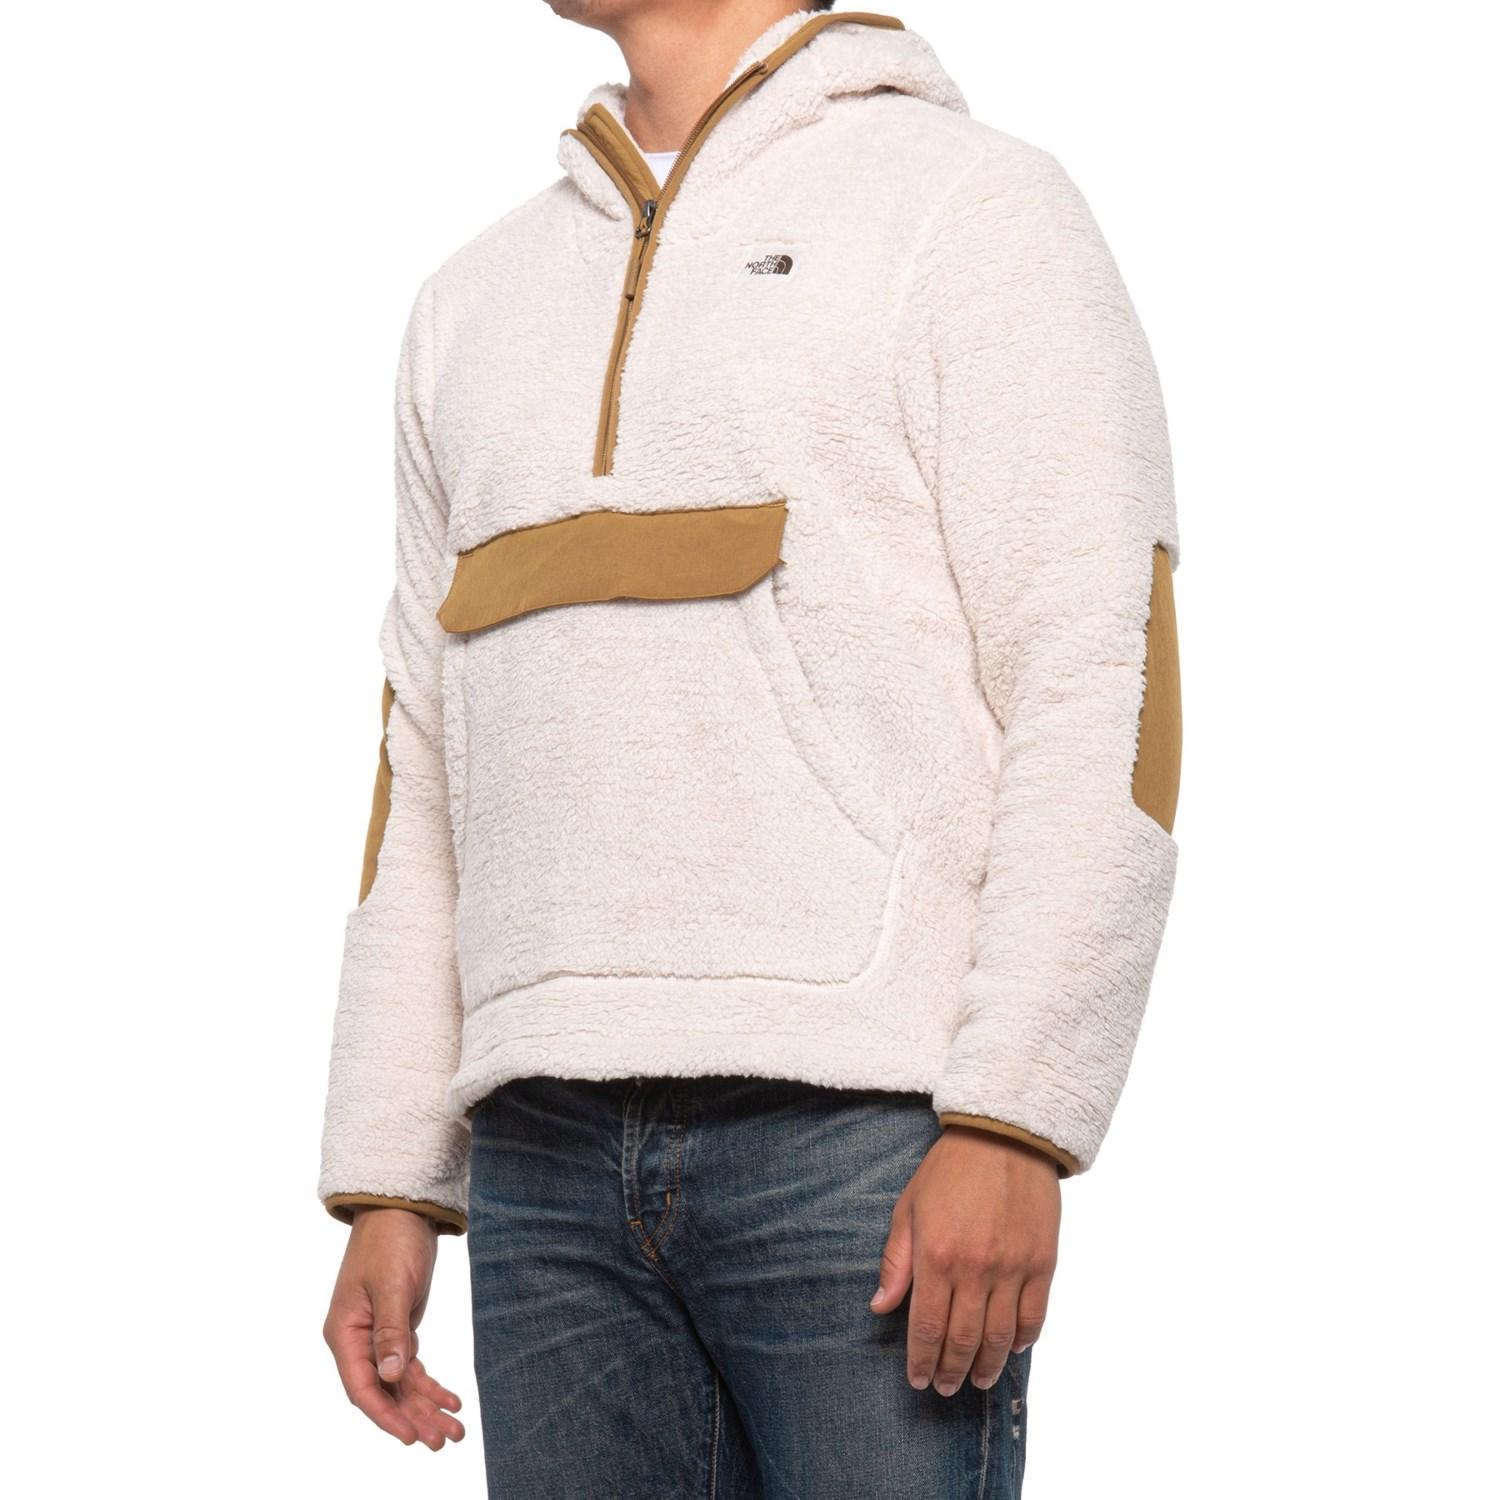 The North Face Fleece Campshire Pullover Hoodie in Vintage White ...